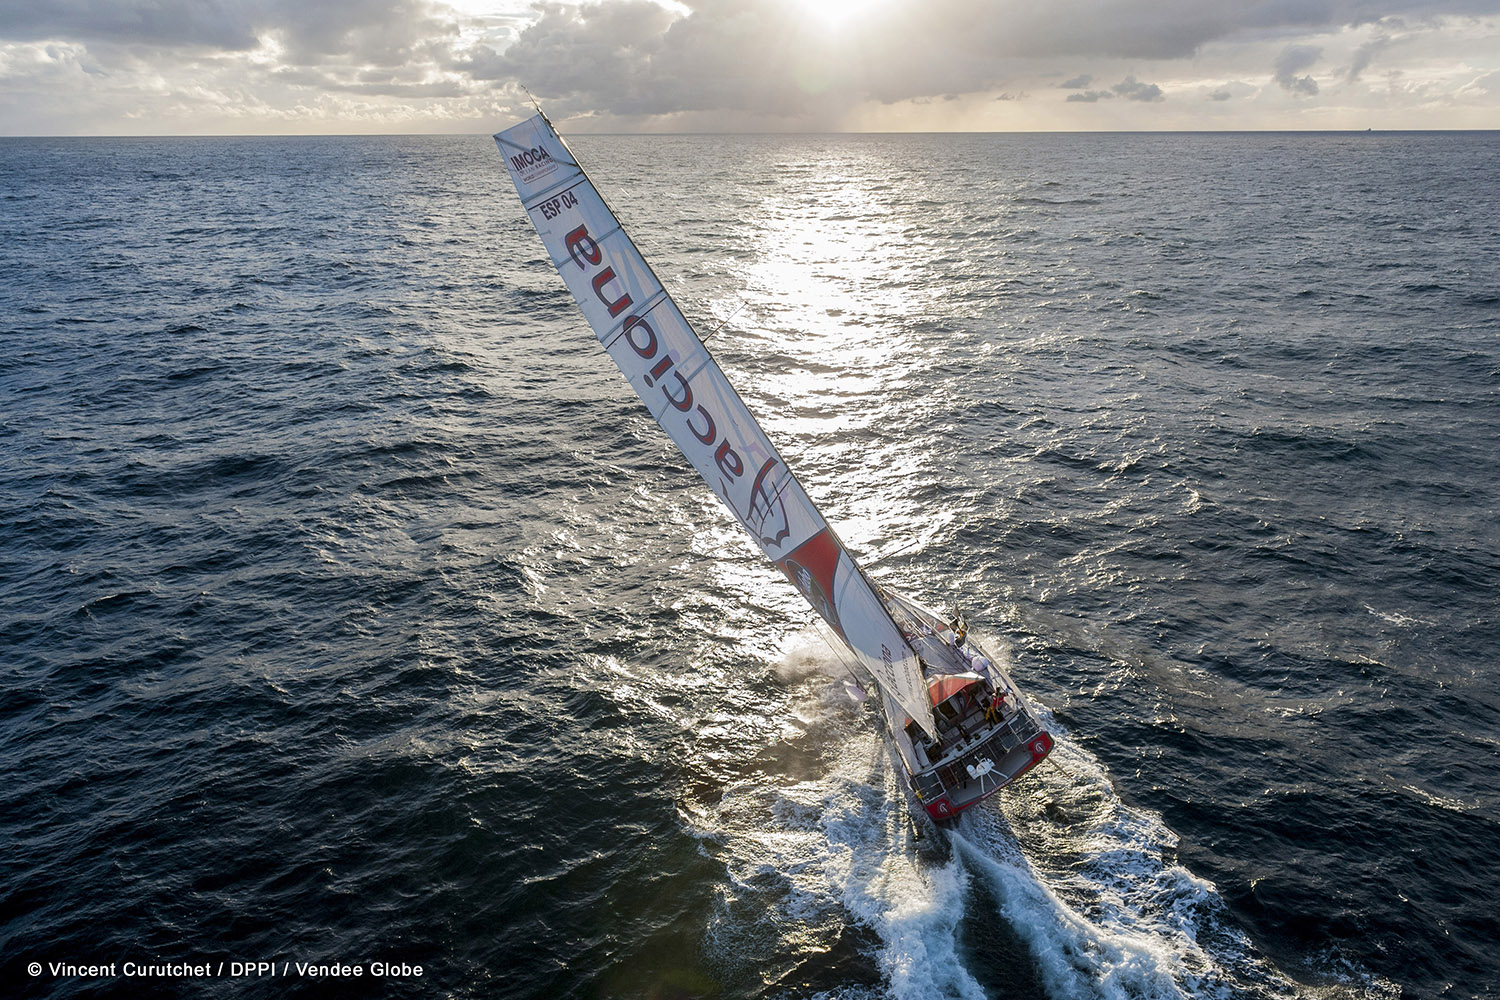 29 competitors started the 2017-2017 Vendee Globe; only one will win. Photo: Vincent Curutchet/DPPI/Vendee Globe.